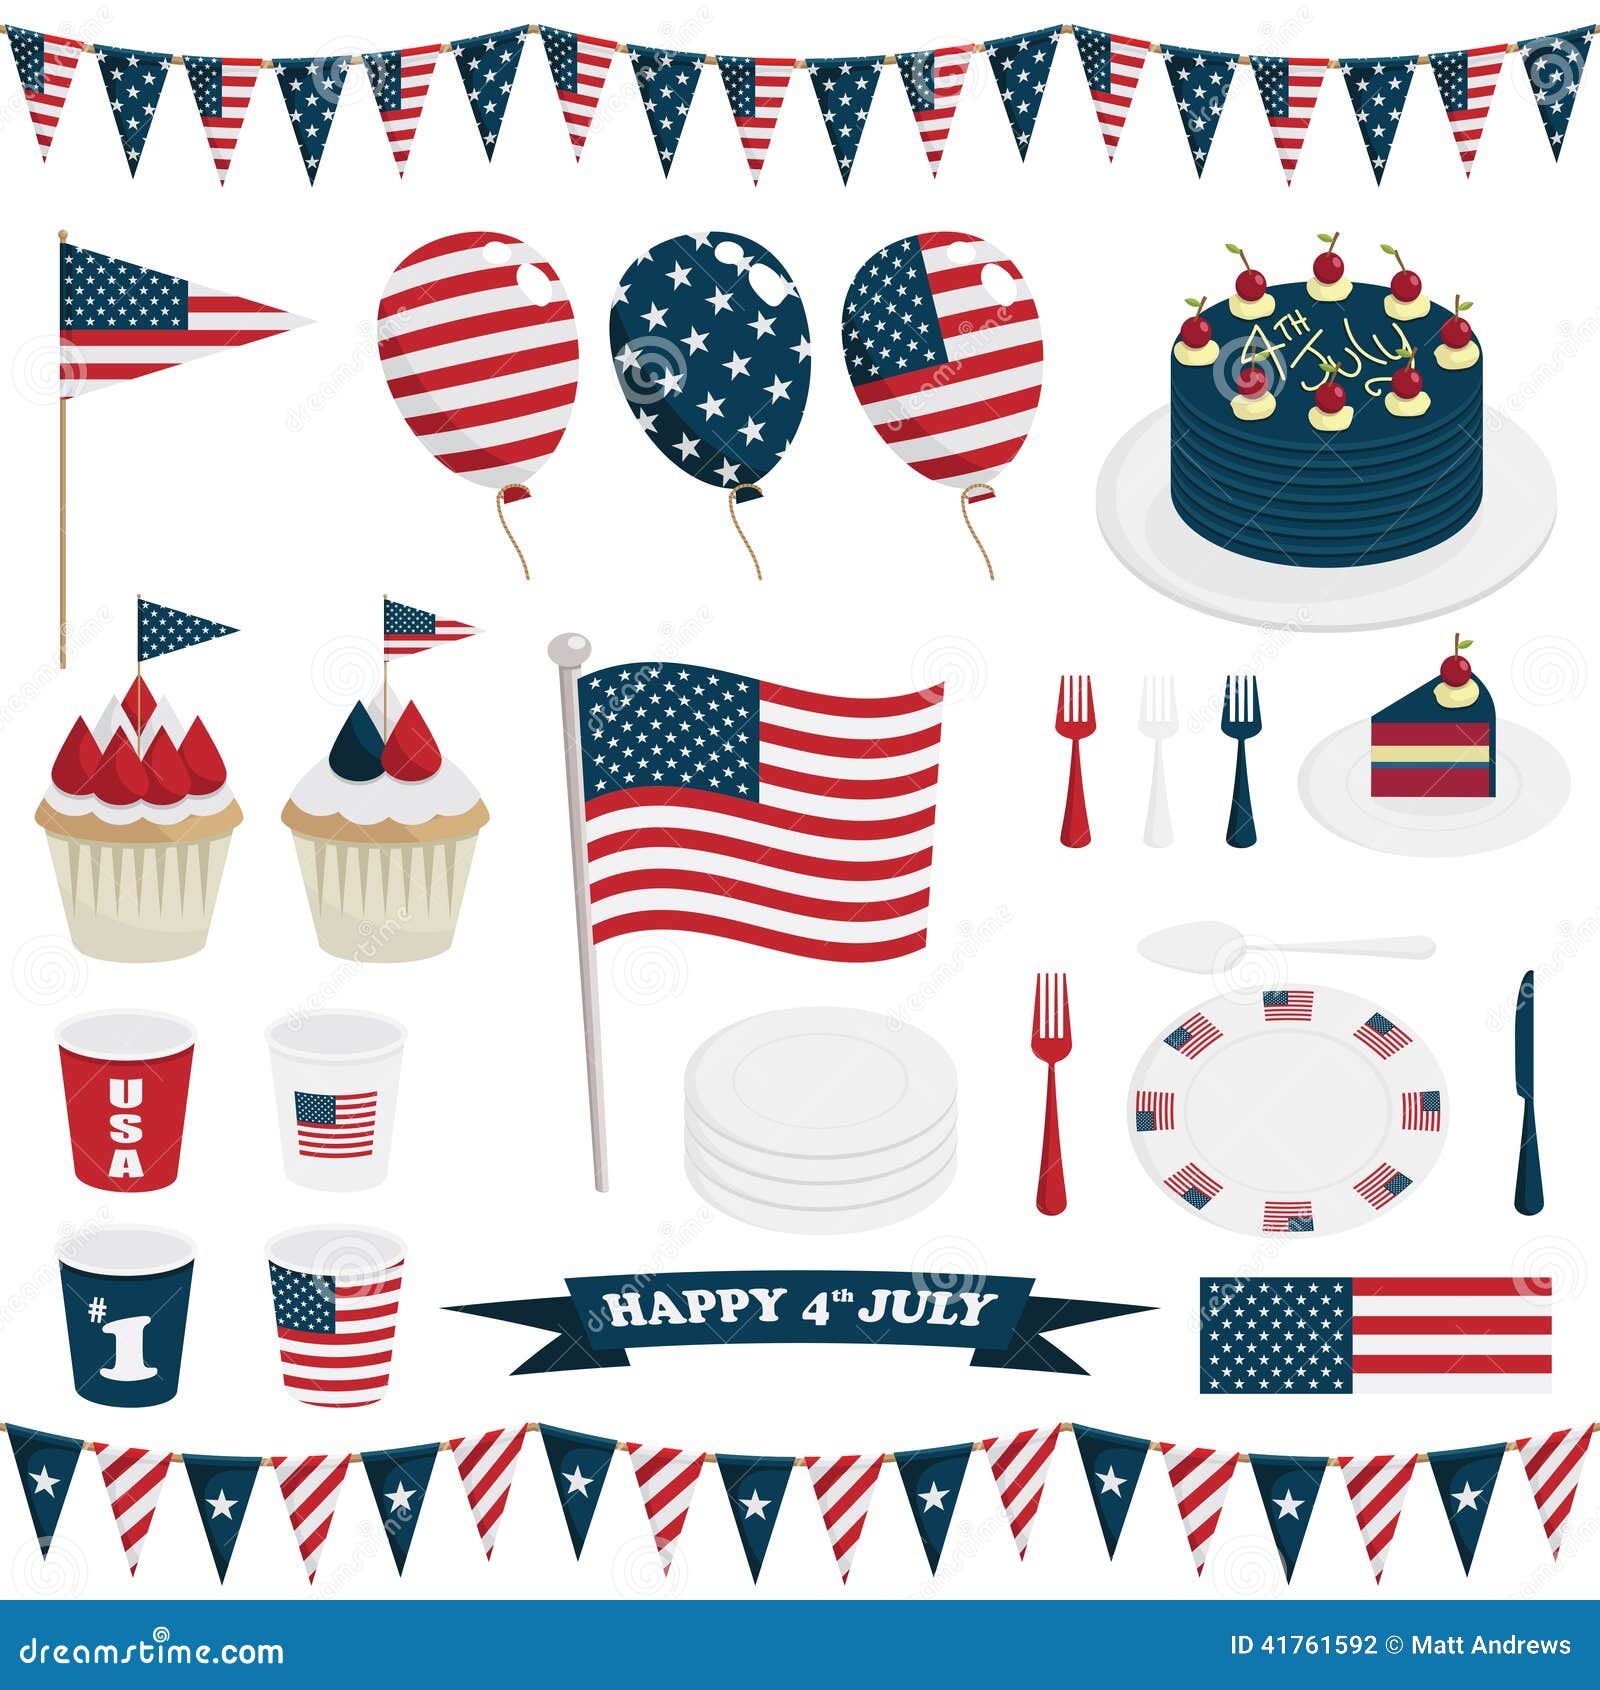  Usa  Decorations  Stock Vector Image 41761592